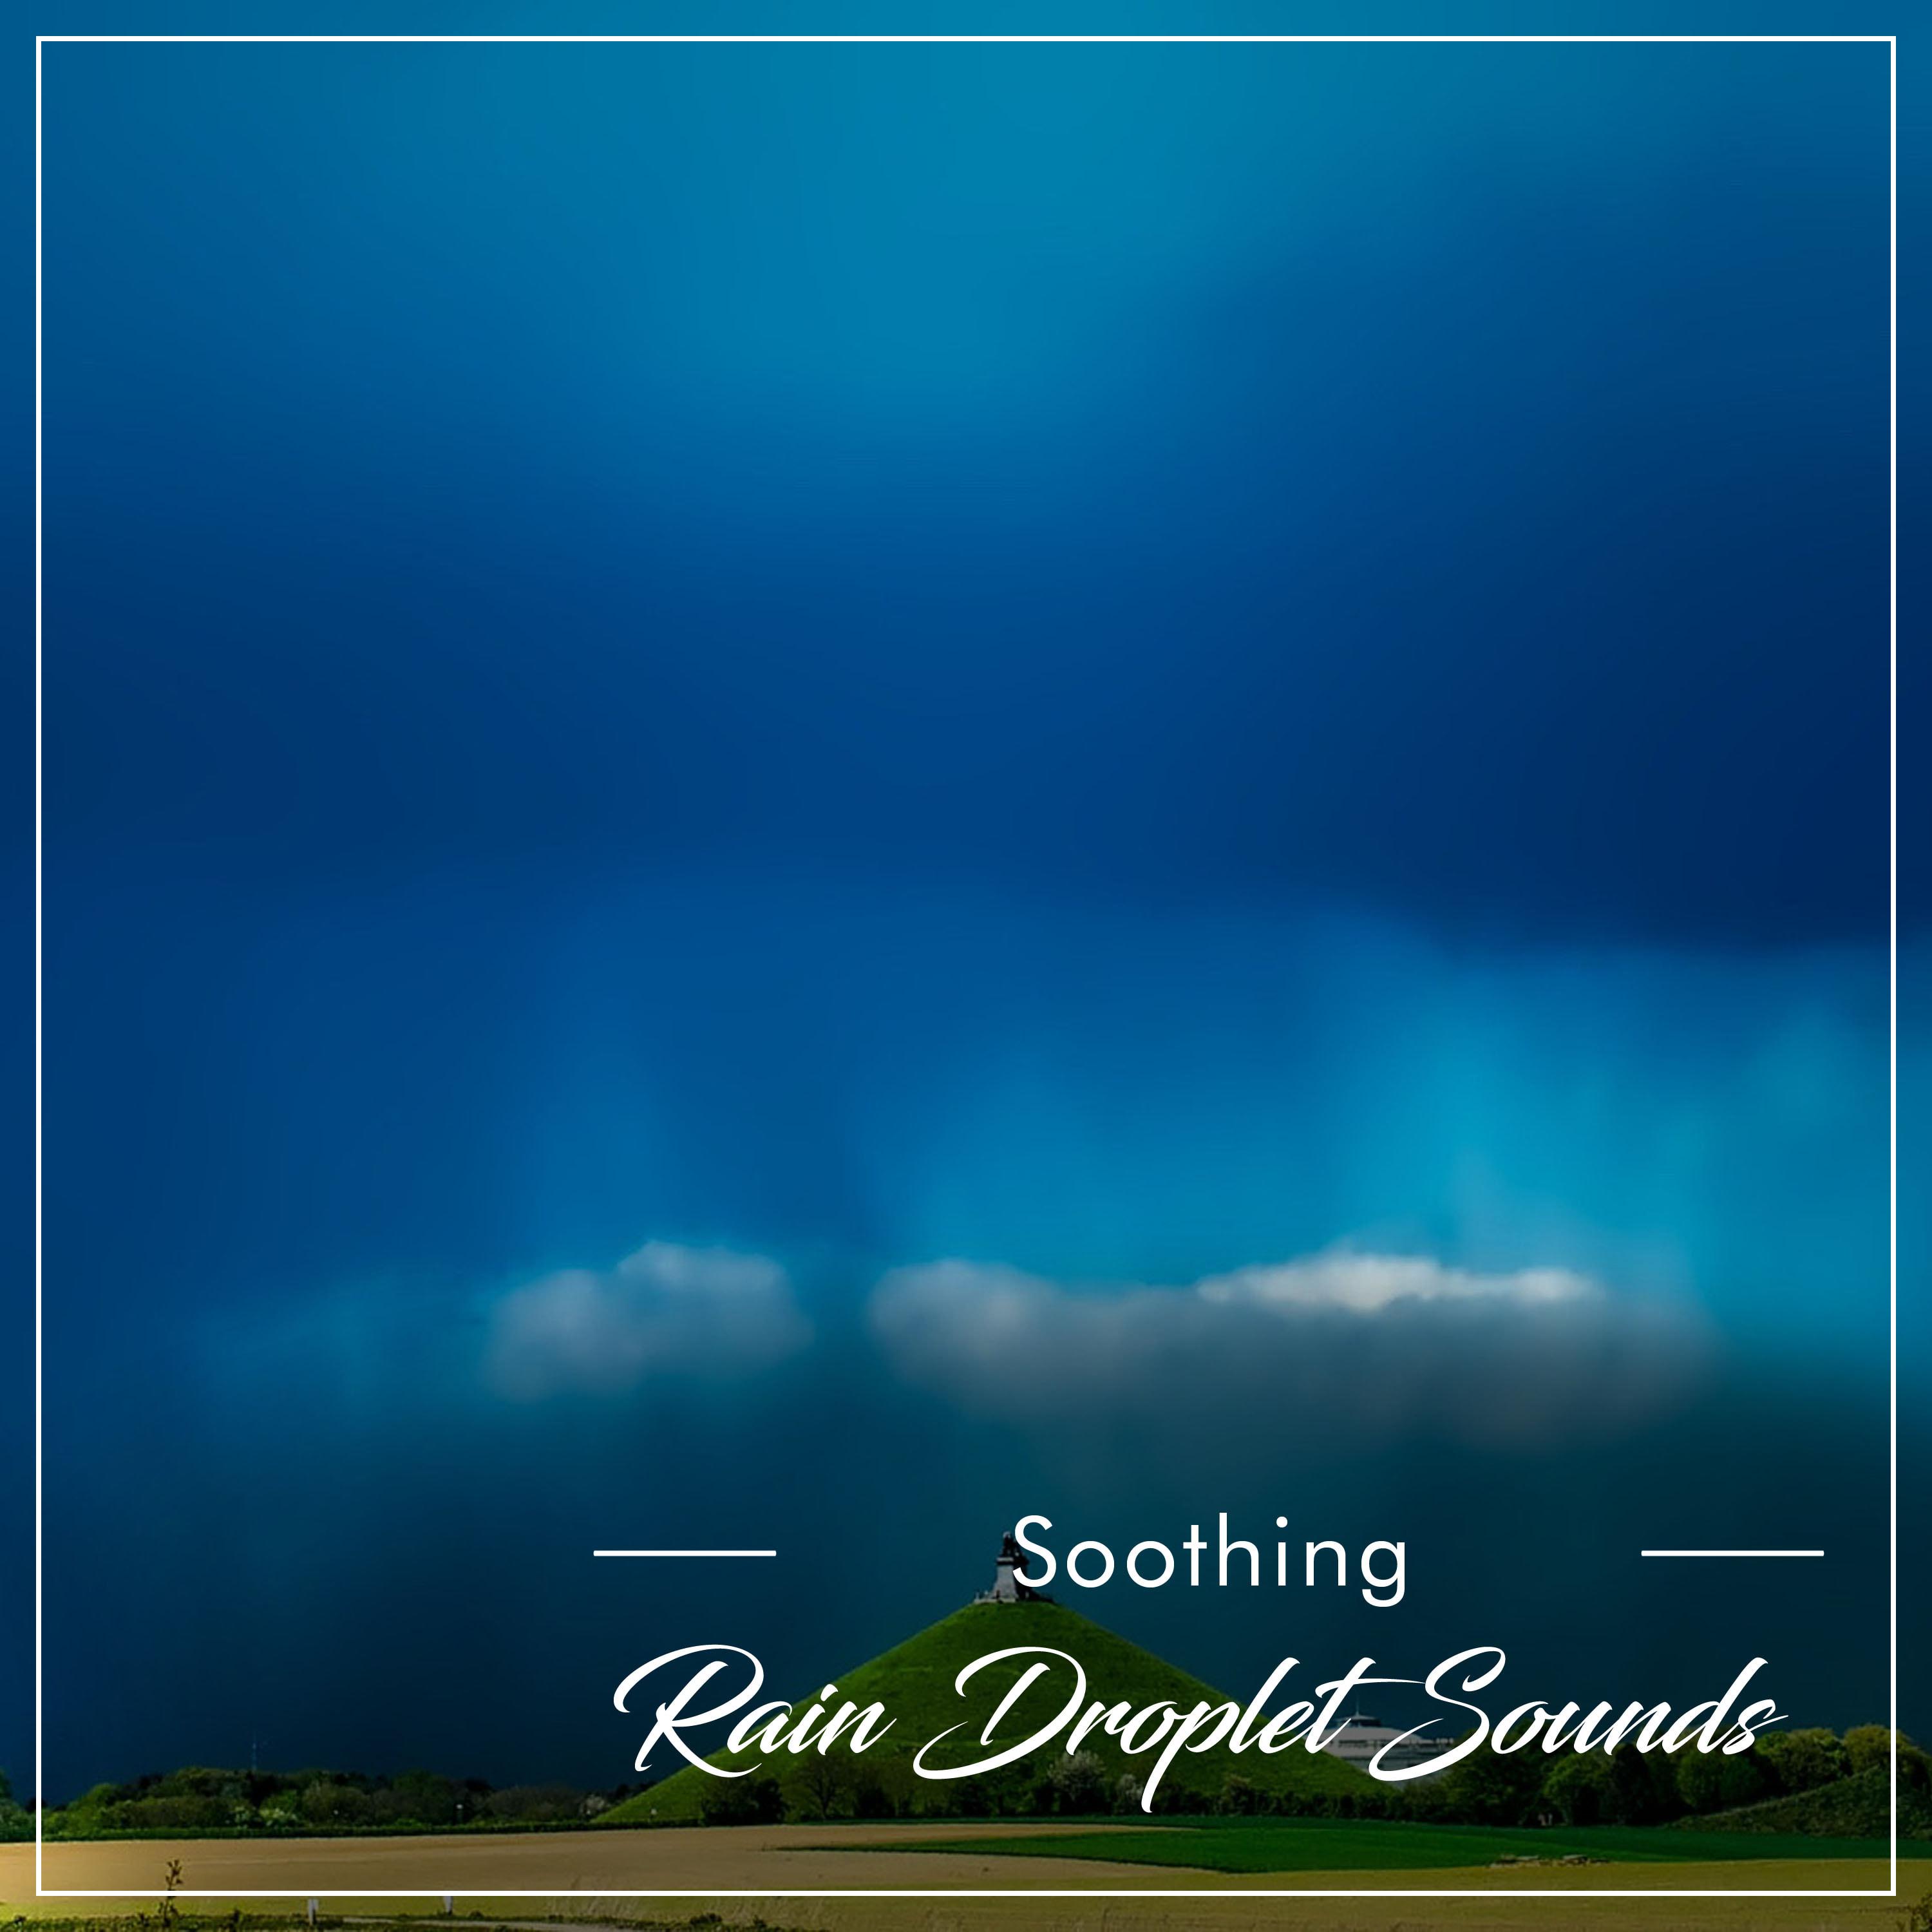 #11 Soothing Rain Droplet Sounds from Nature